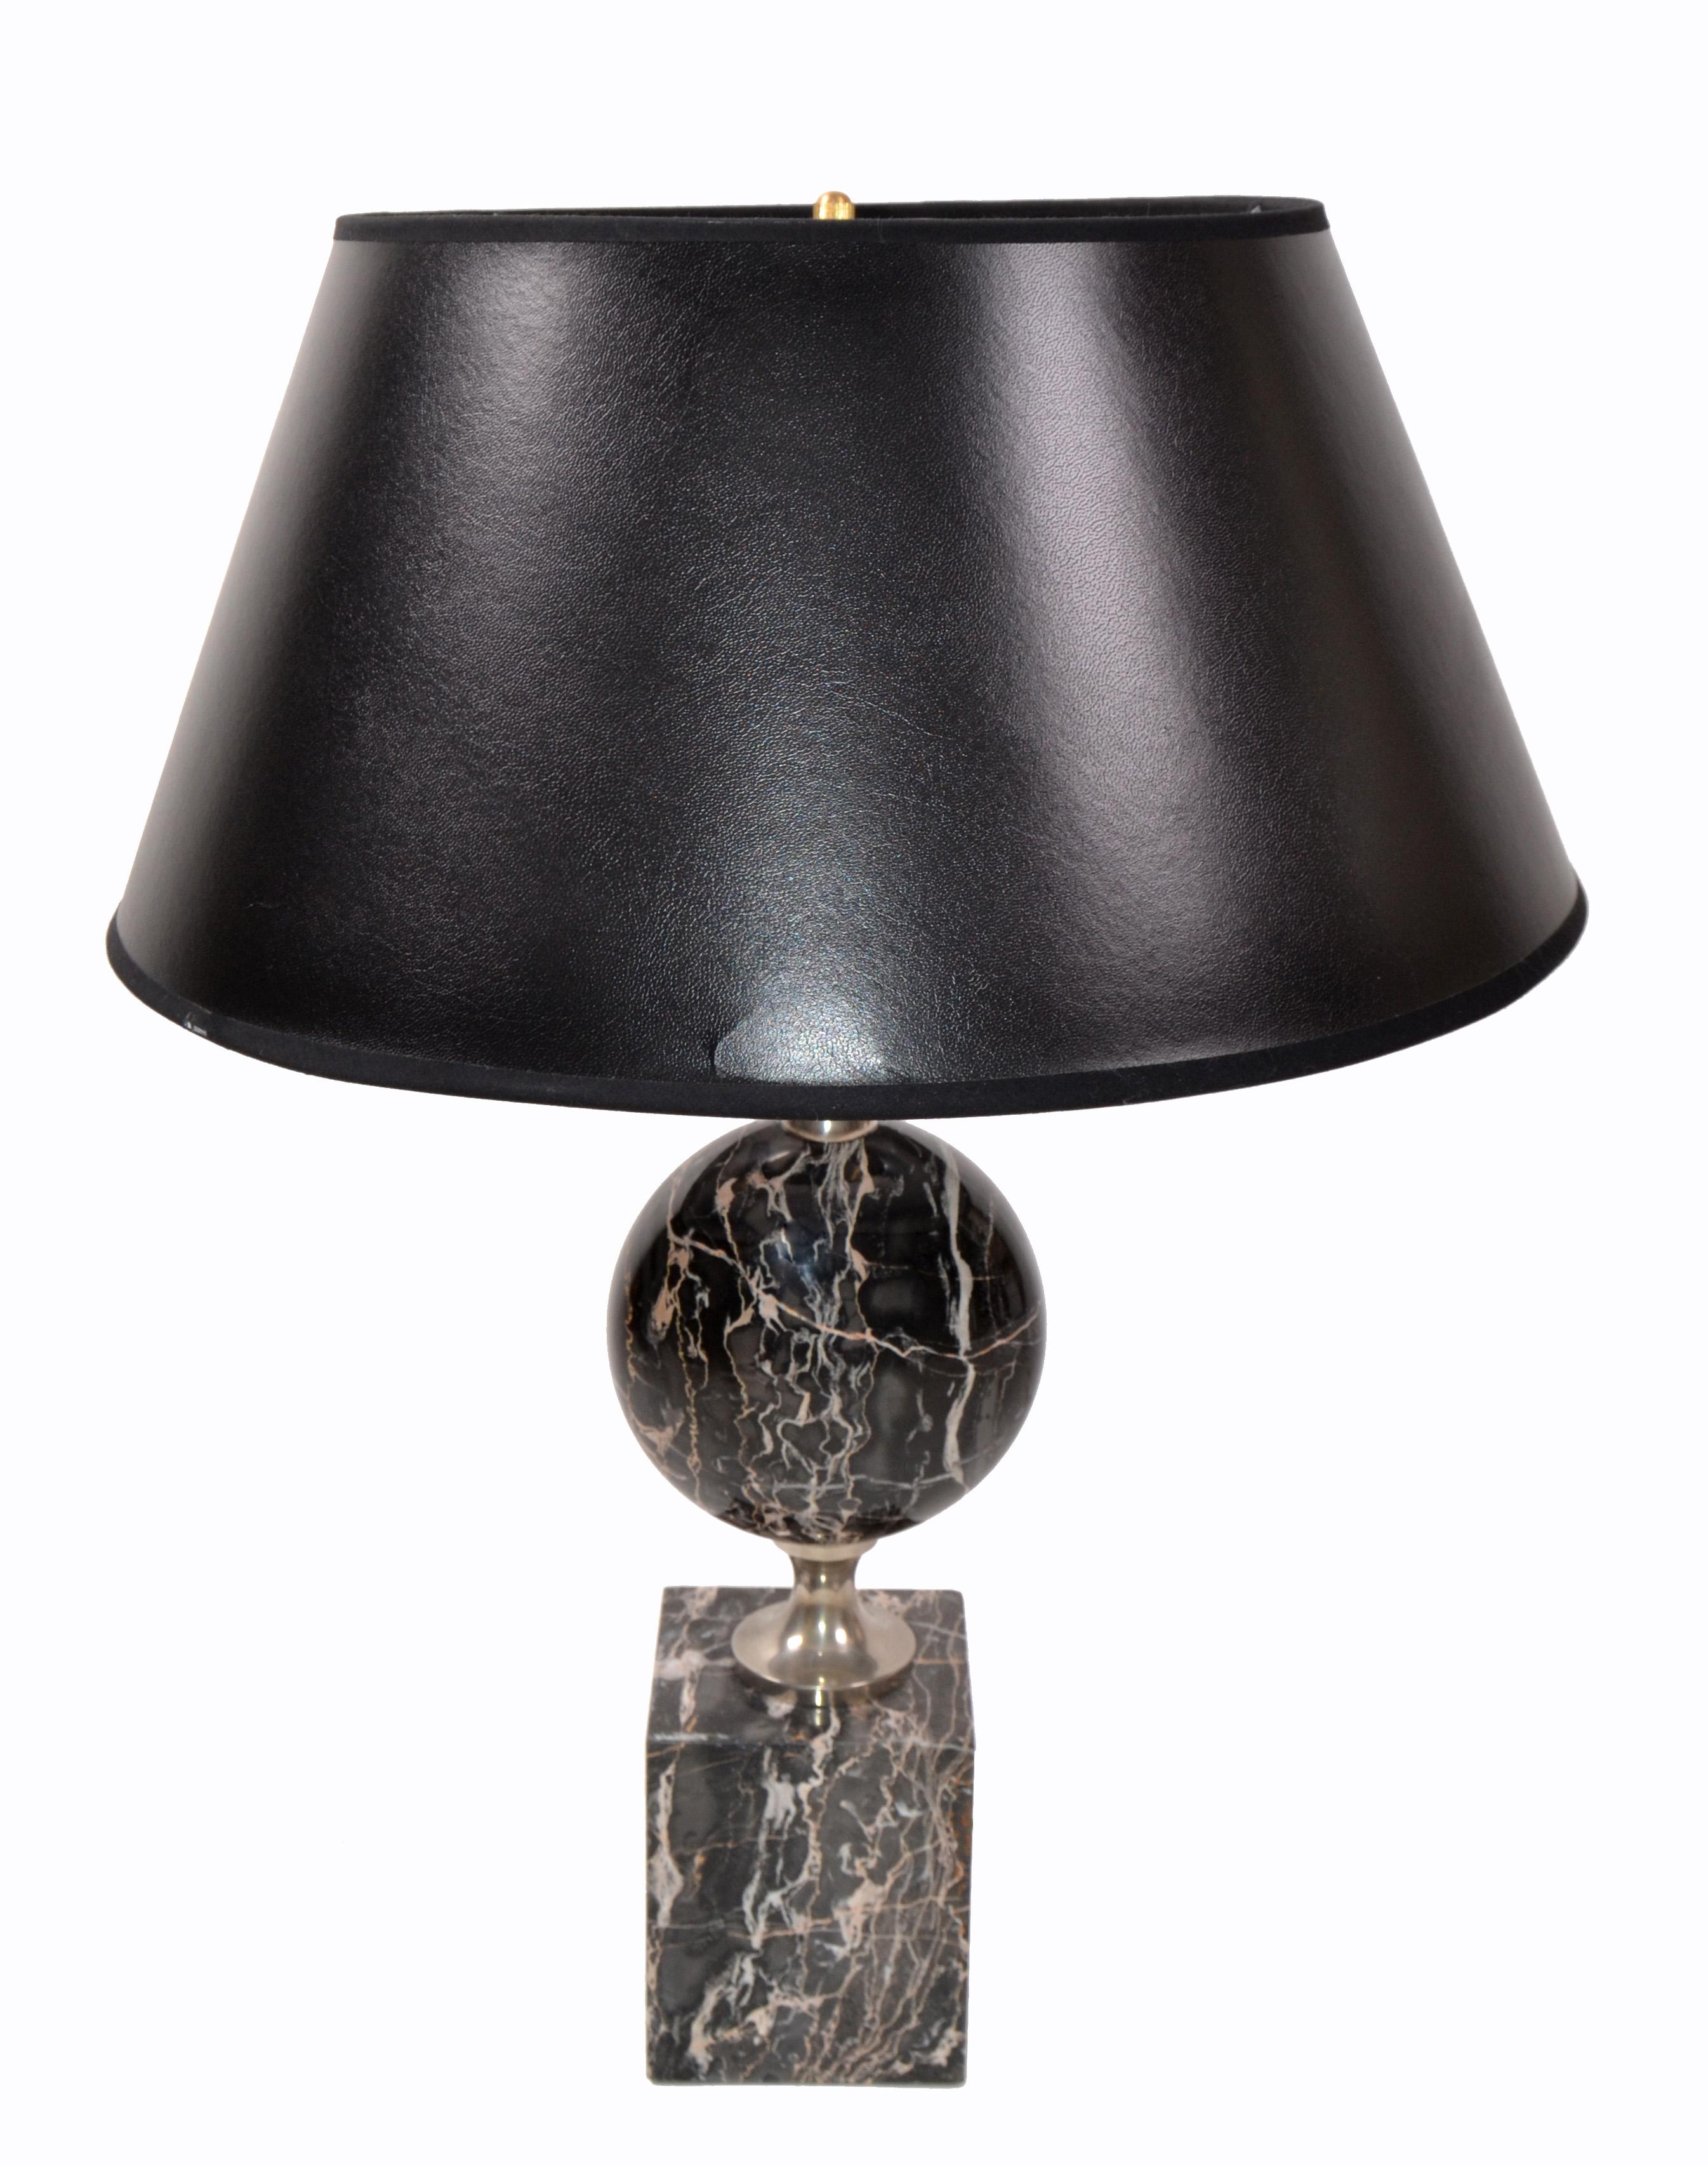 Maison Barbier French Marble and Chrome Table Lamp, 1960 For Sale 4